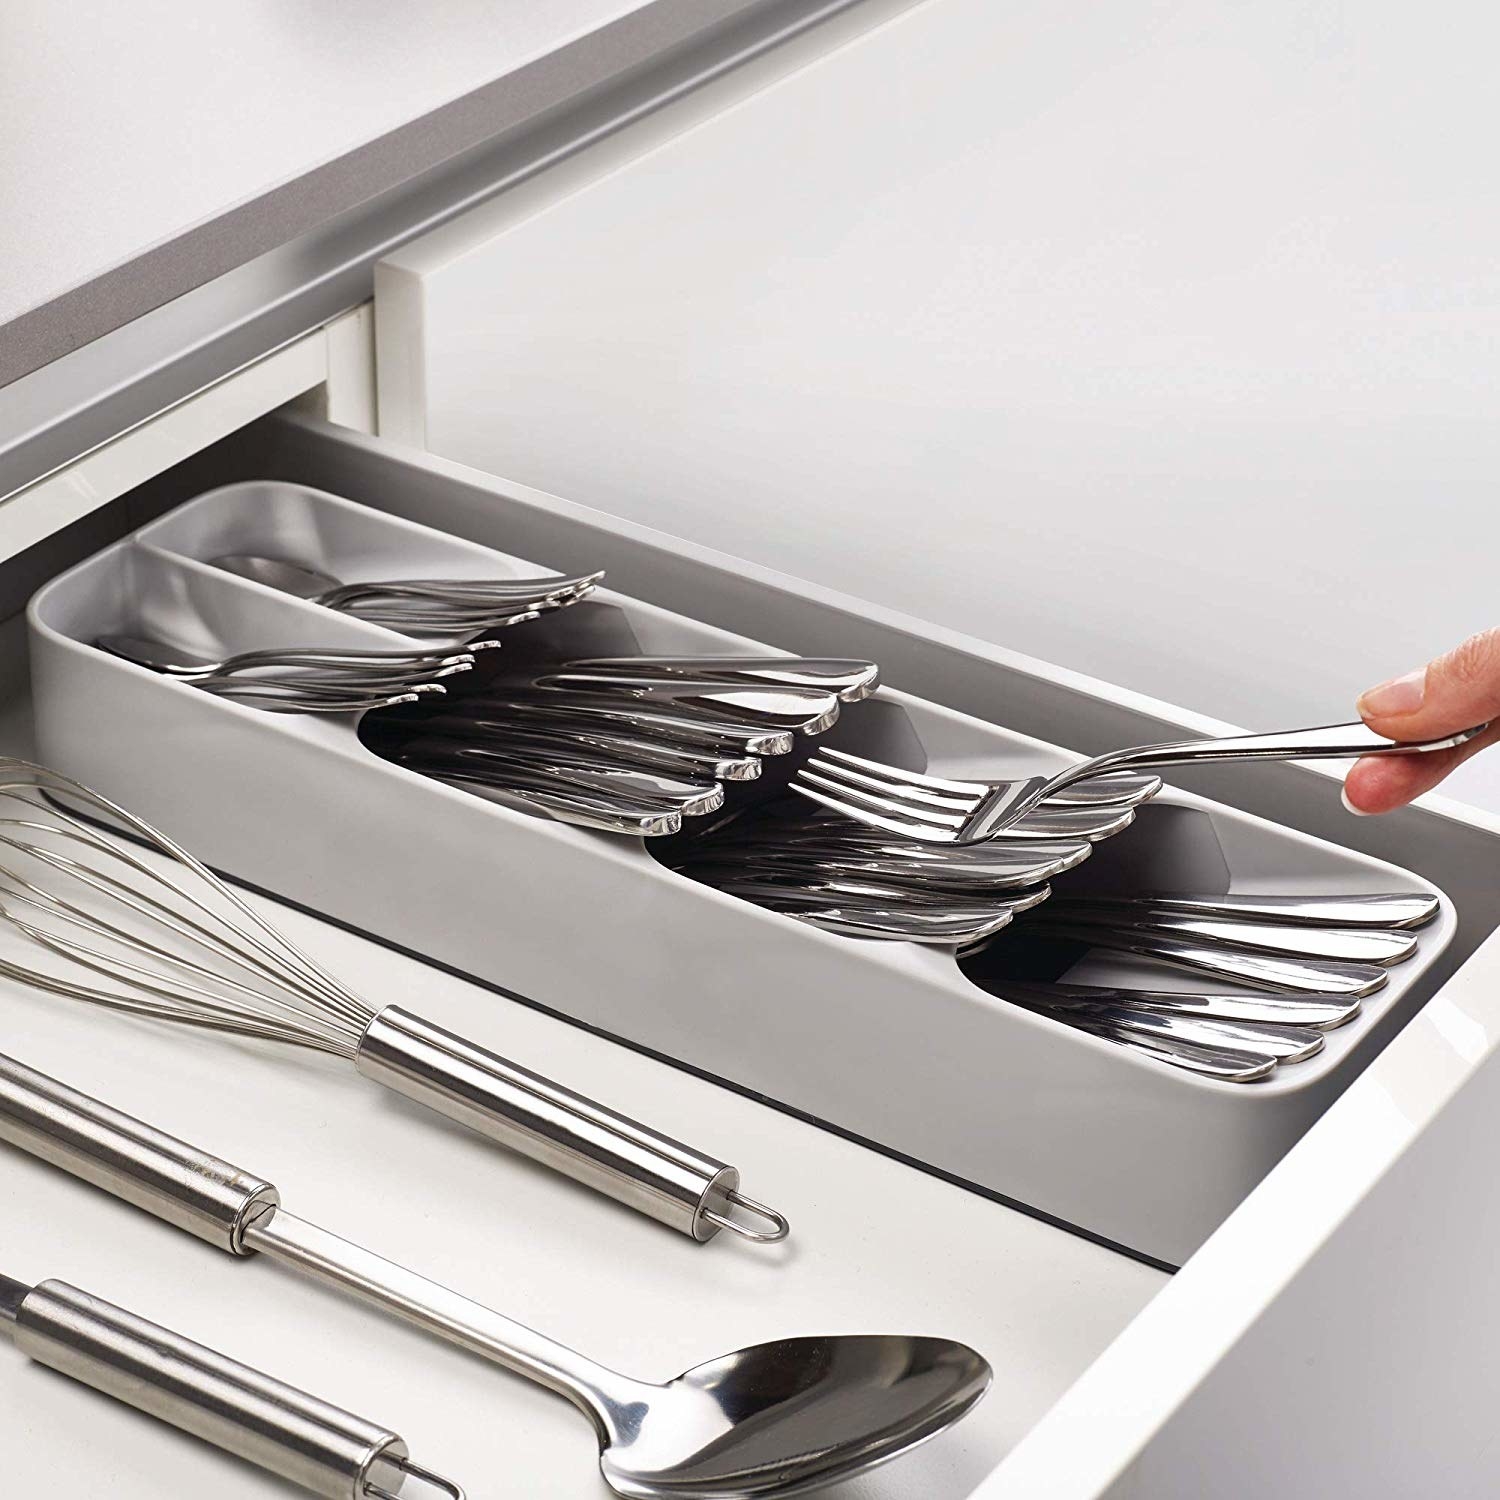 A person putting a fork into the organizer